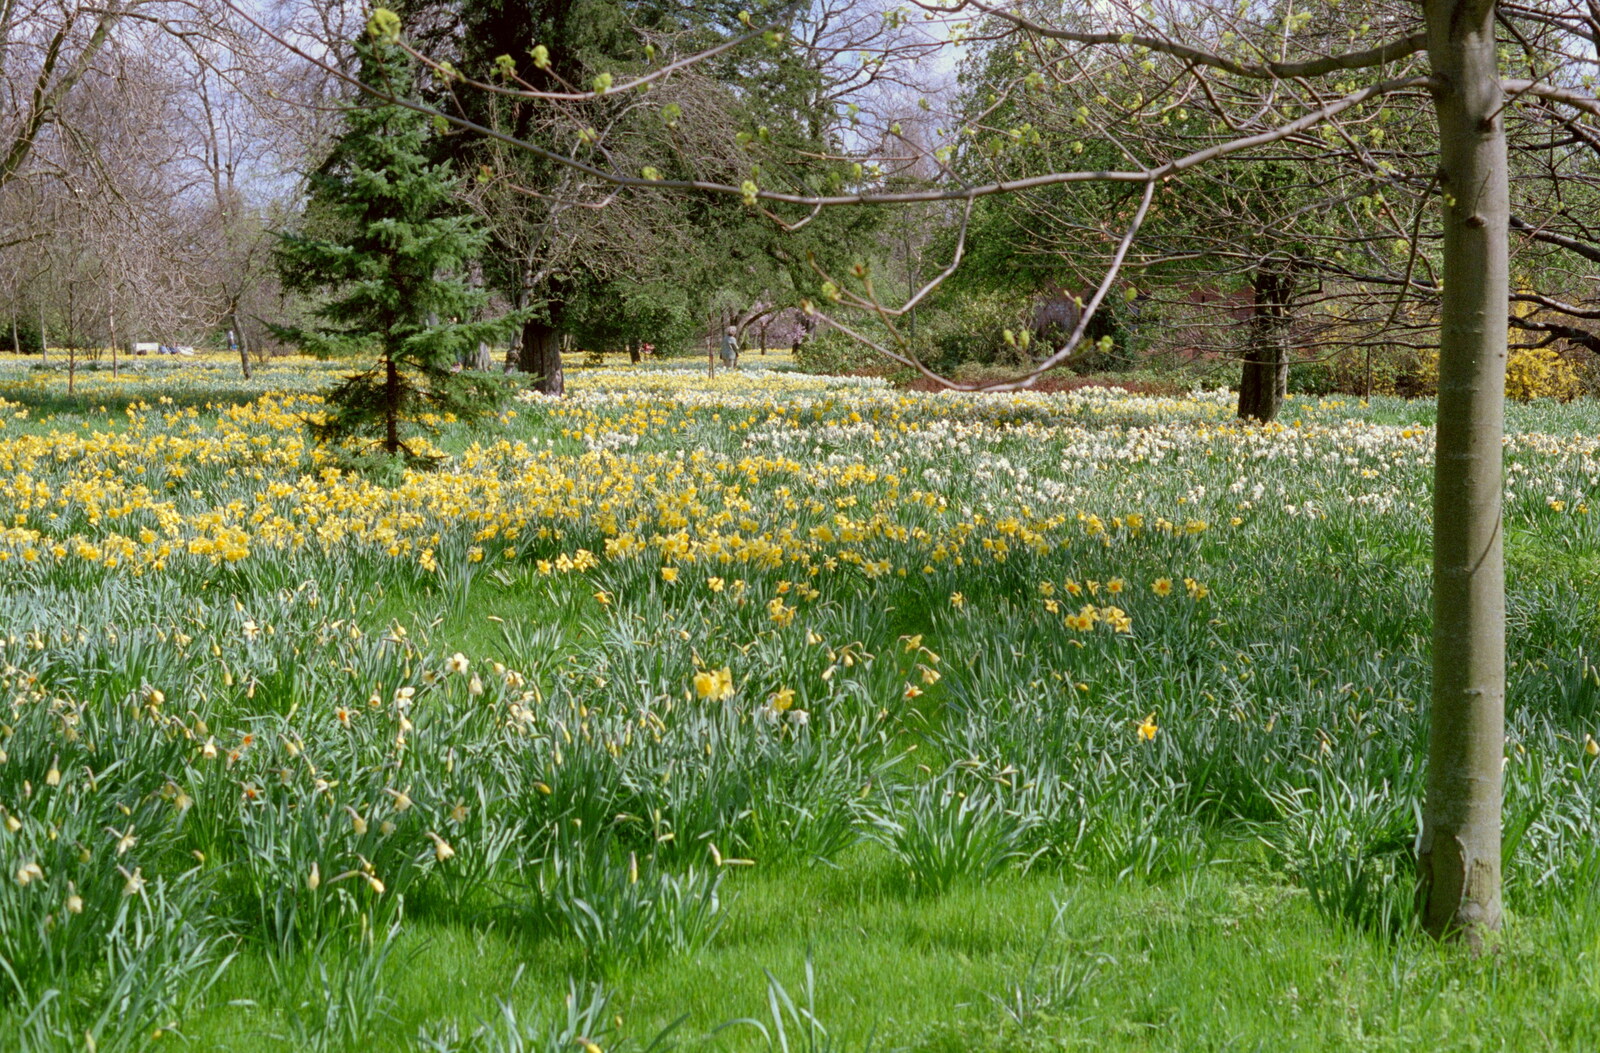 Daffodils from Trotsky's Birthday, New Malden, Kingston Upon Thames - 20th April 1986